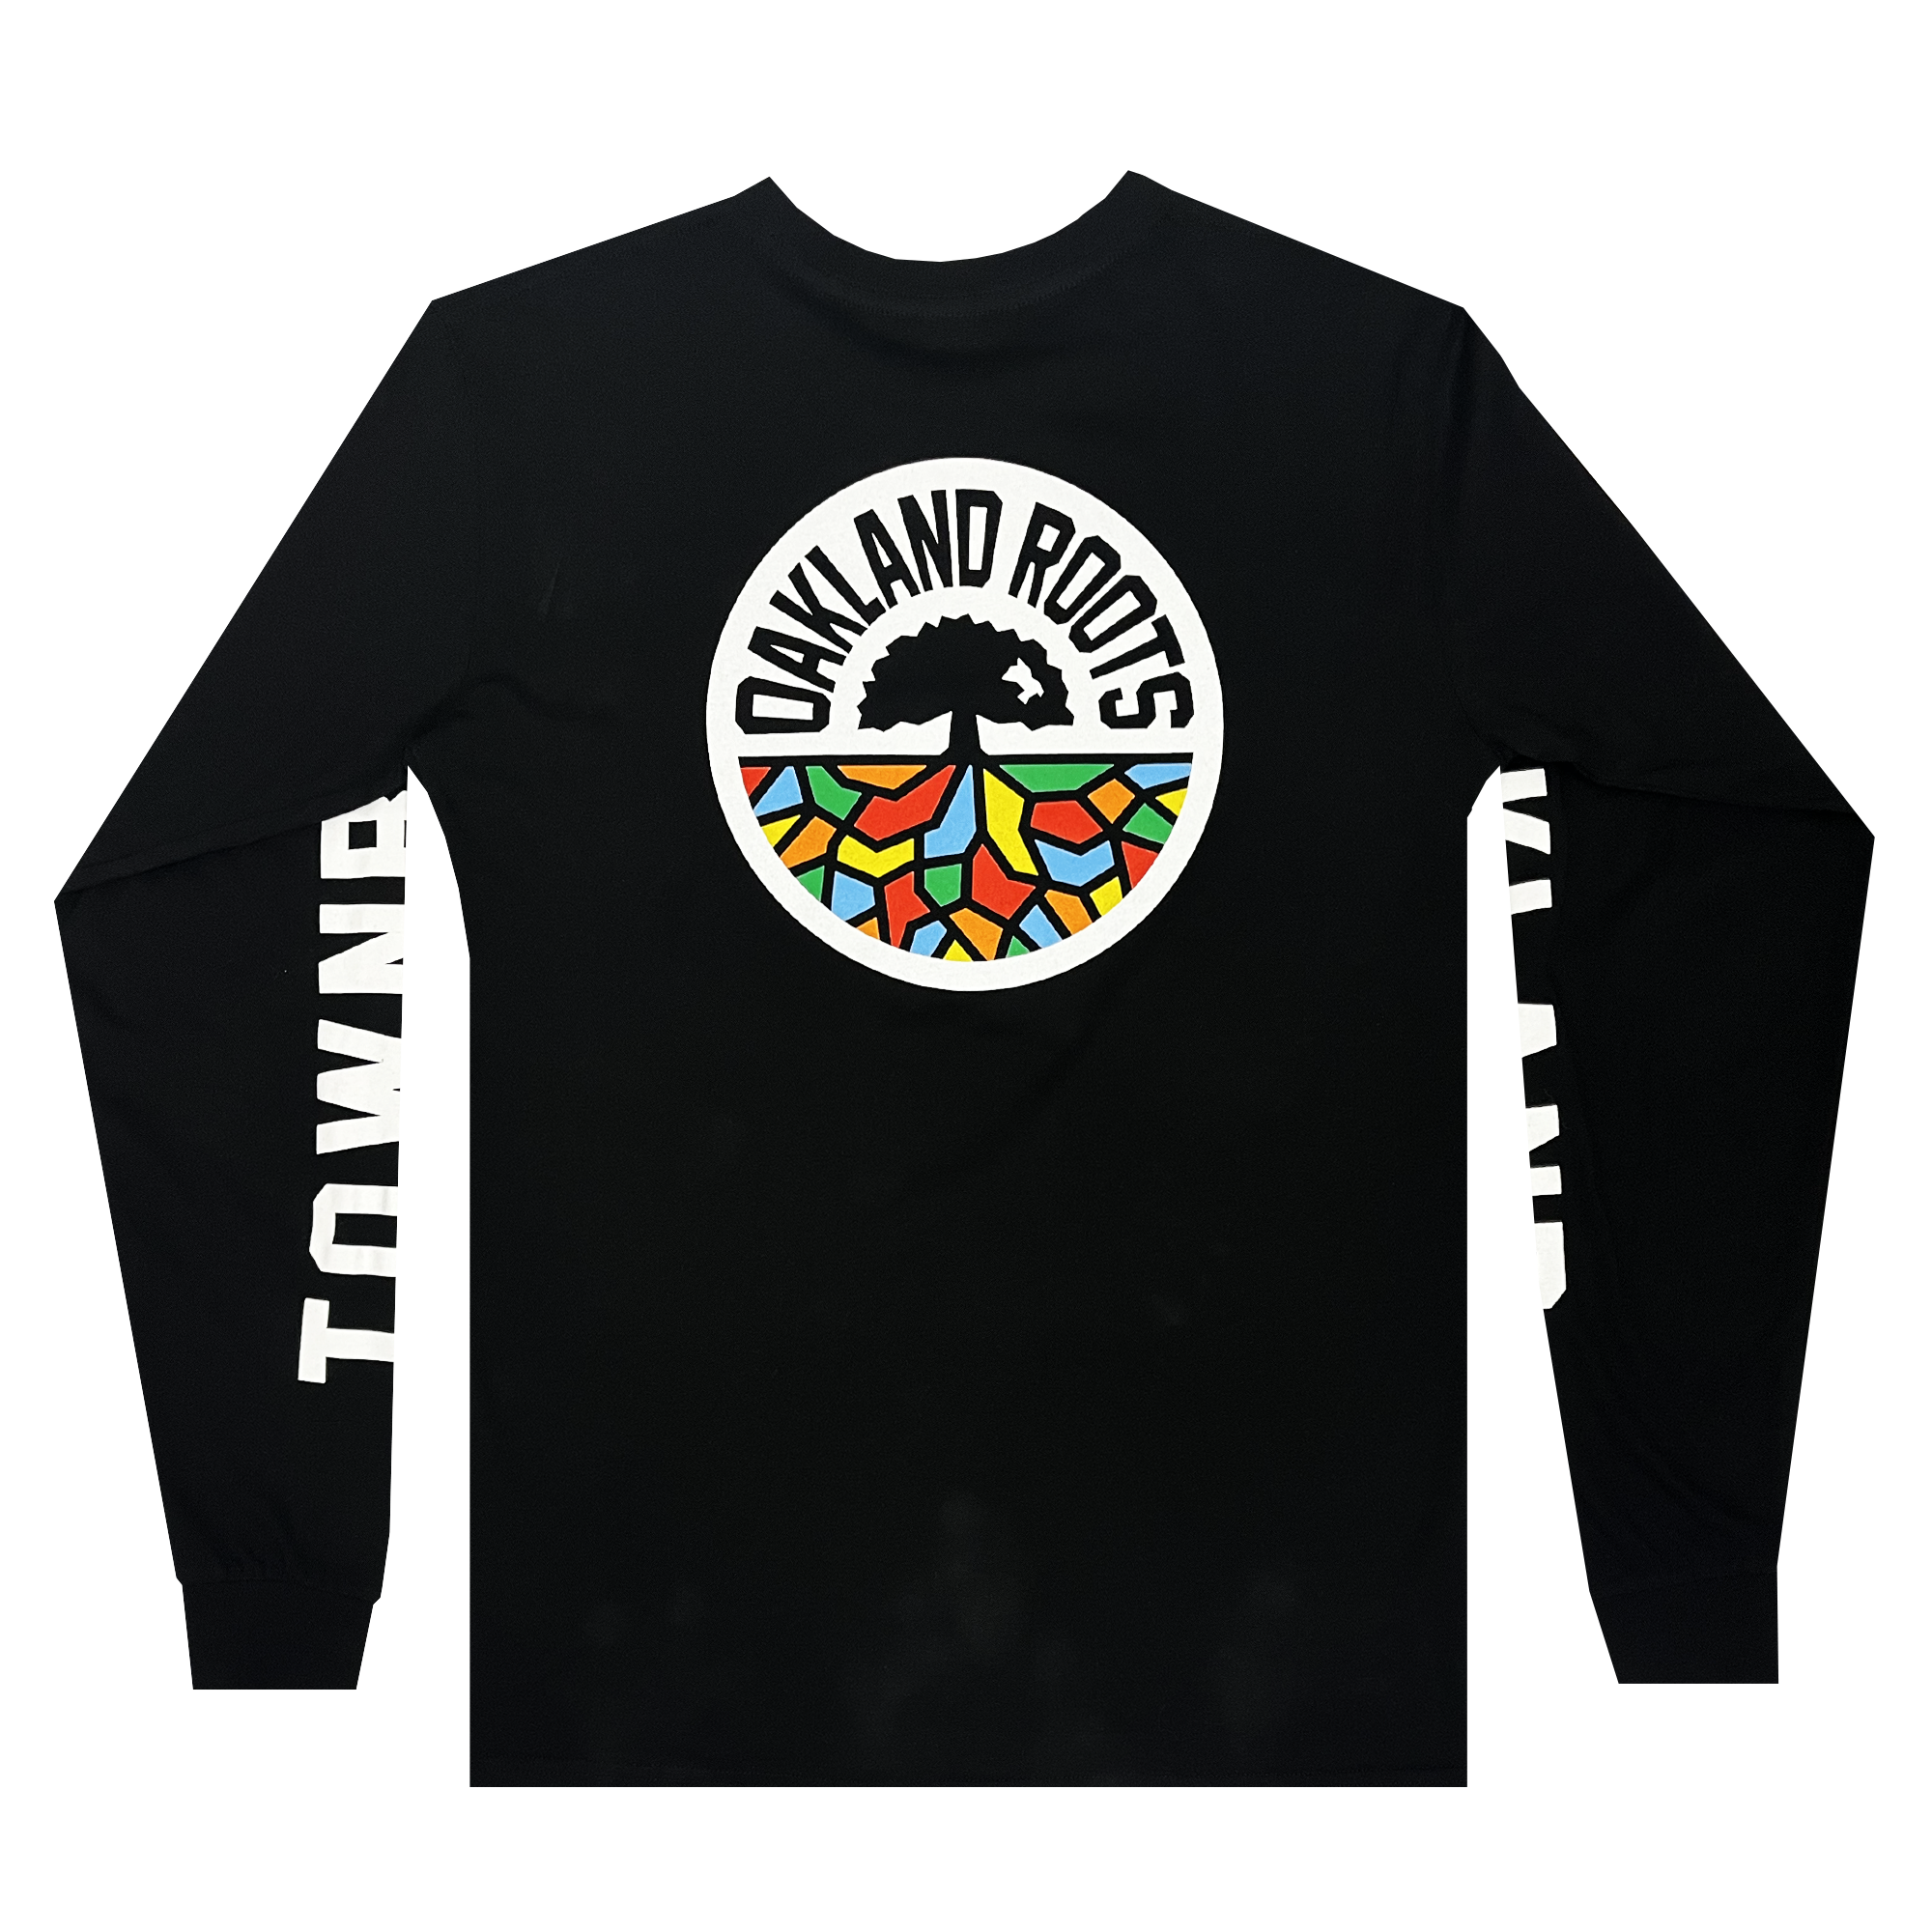 Back view of black long-sleeve shirt with a large round multi-color Oakland Roots SC logo.